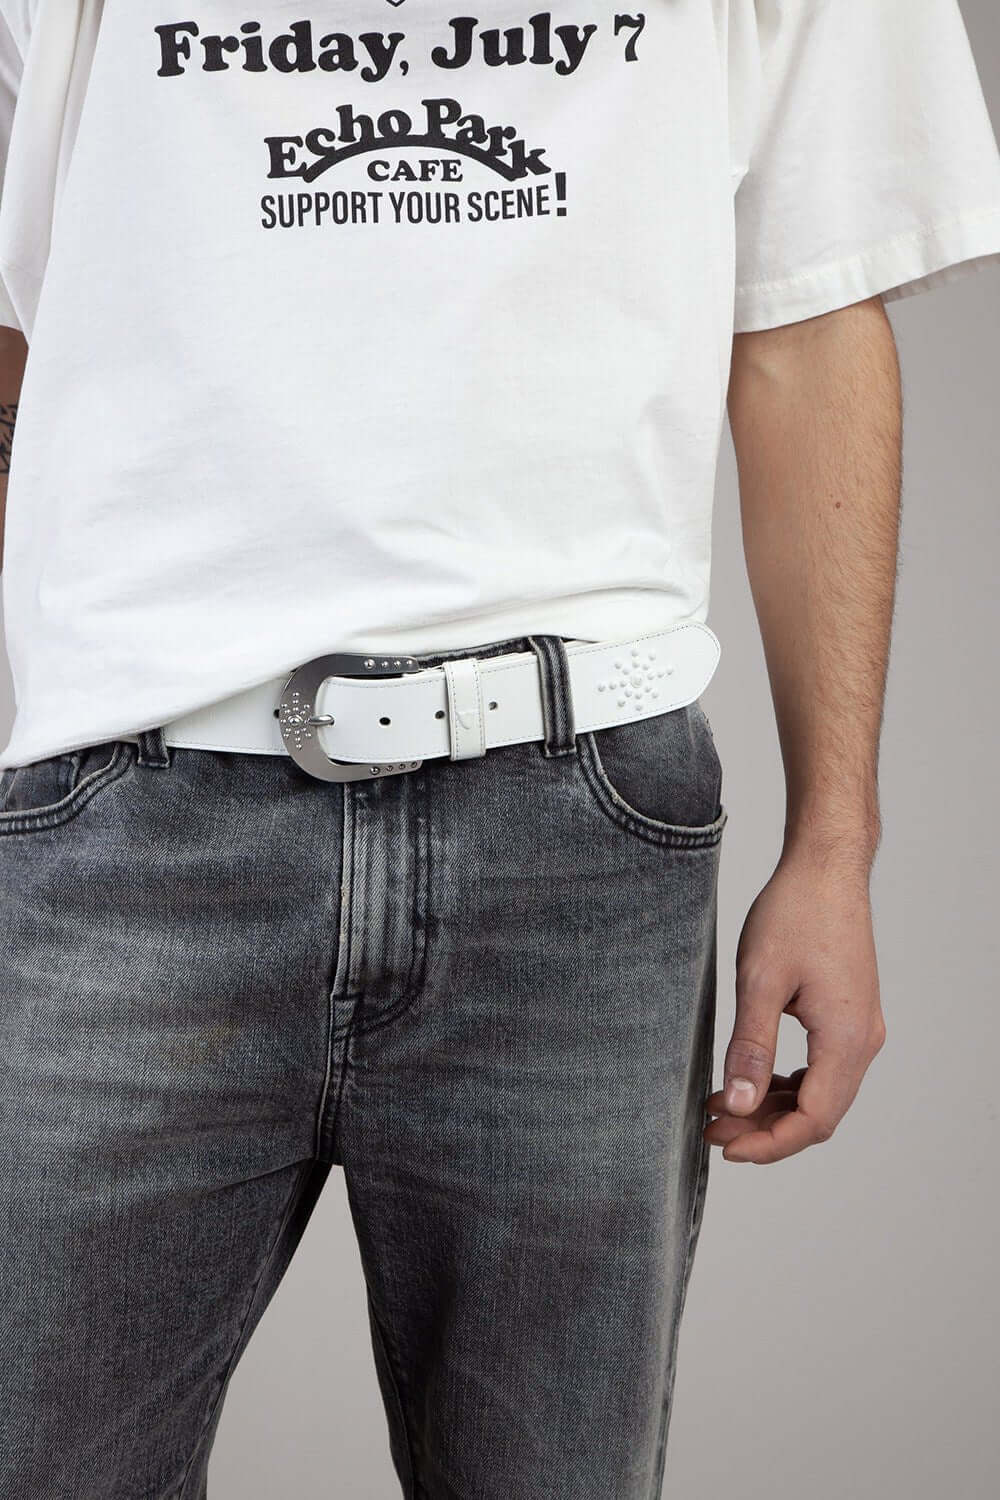 MIRAGE BELT White leather belt, zama buckle, with HTC shield logo rivet. Height: 4 cm. Made in Italy. HTC LOS ANGELES